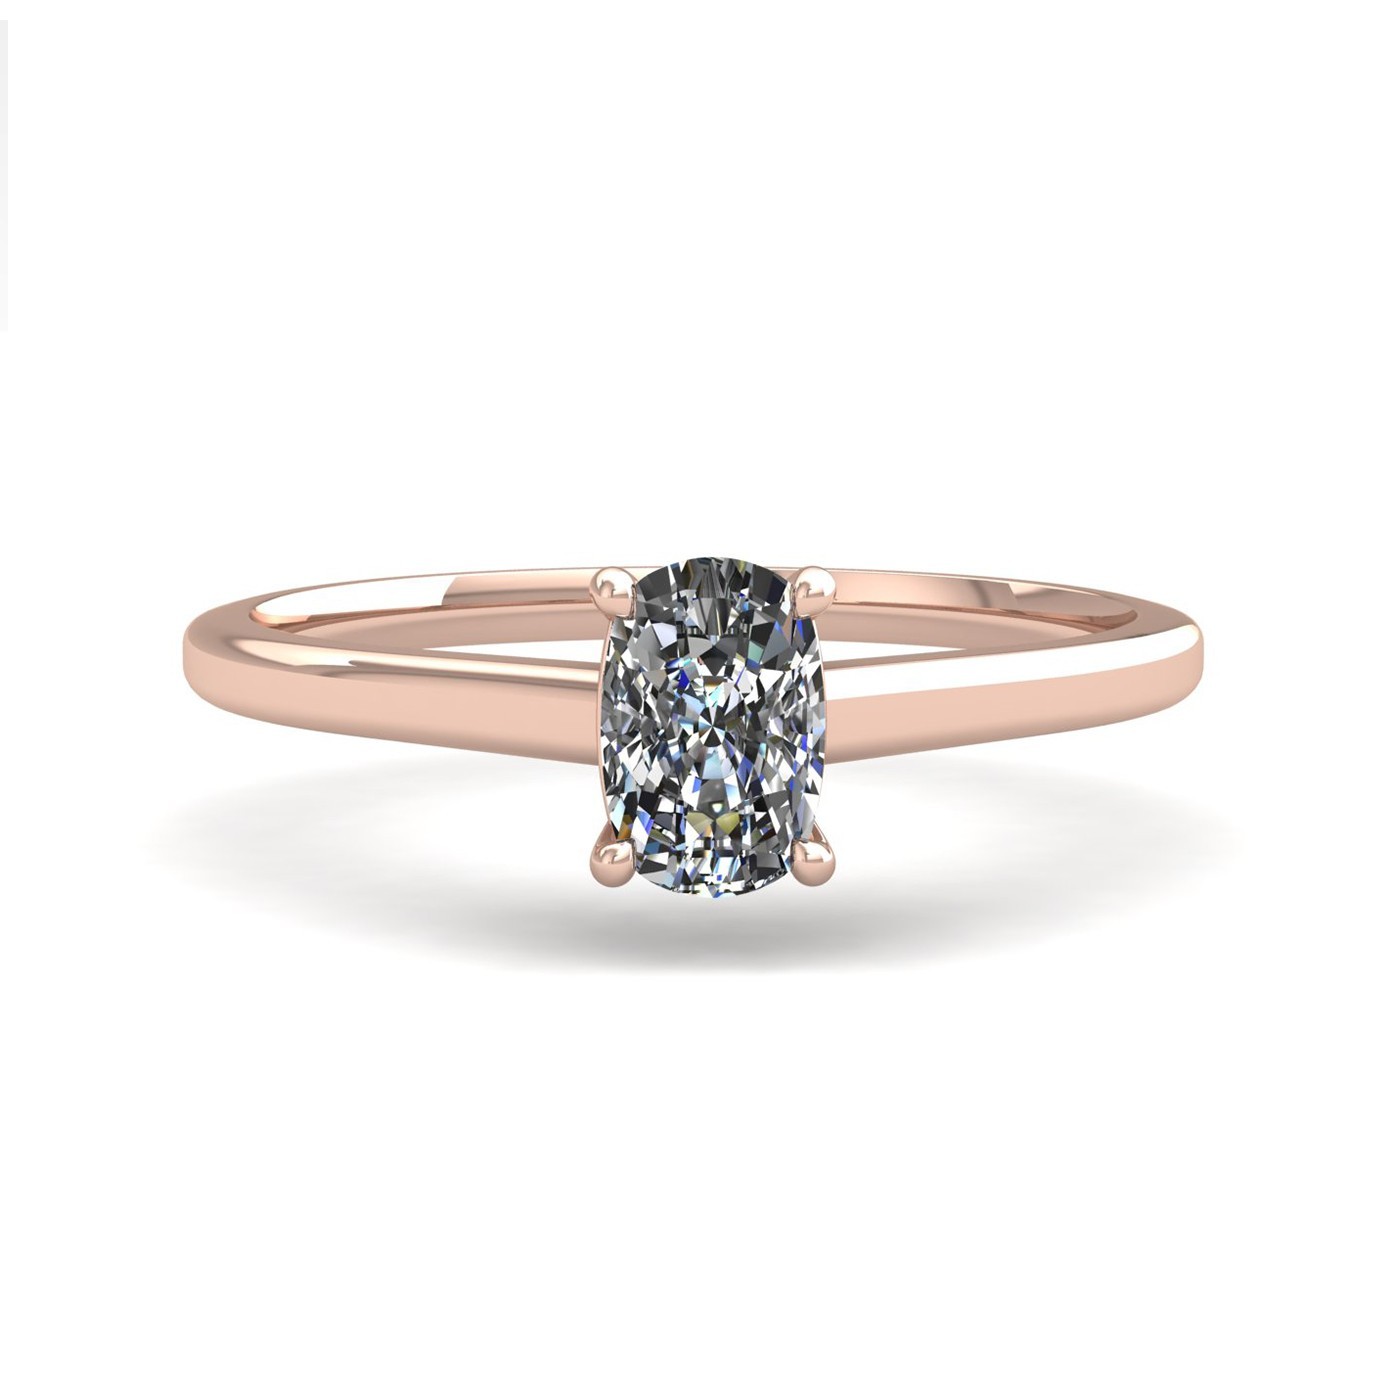 18k rose gold  2.00 ct 4 prongs solitaire elongated cushion cut diamond engagement ring with whisper thin band Photos & images